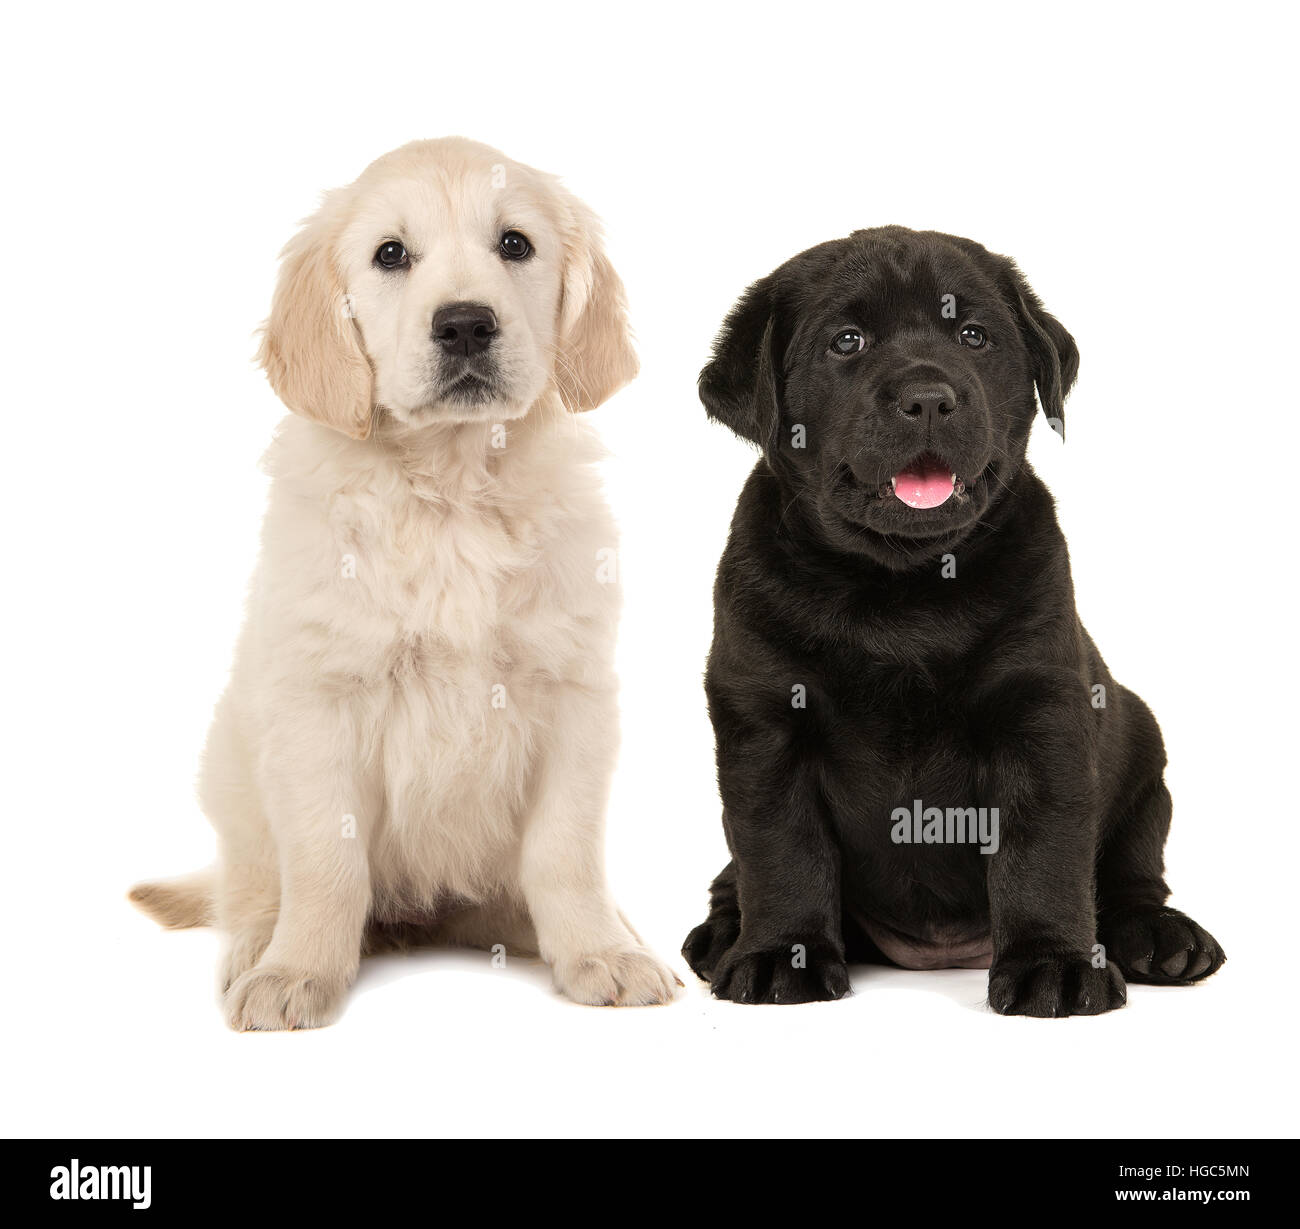 Cute blond golden retriever puppy and black labrador retriever puppy  sitting next to each other isolated on a white background Stock Photo -  Alamy